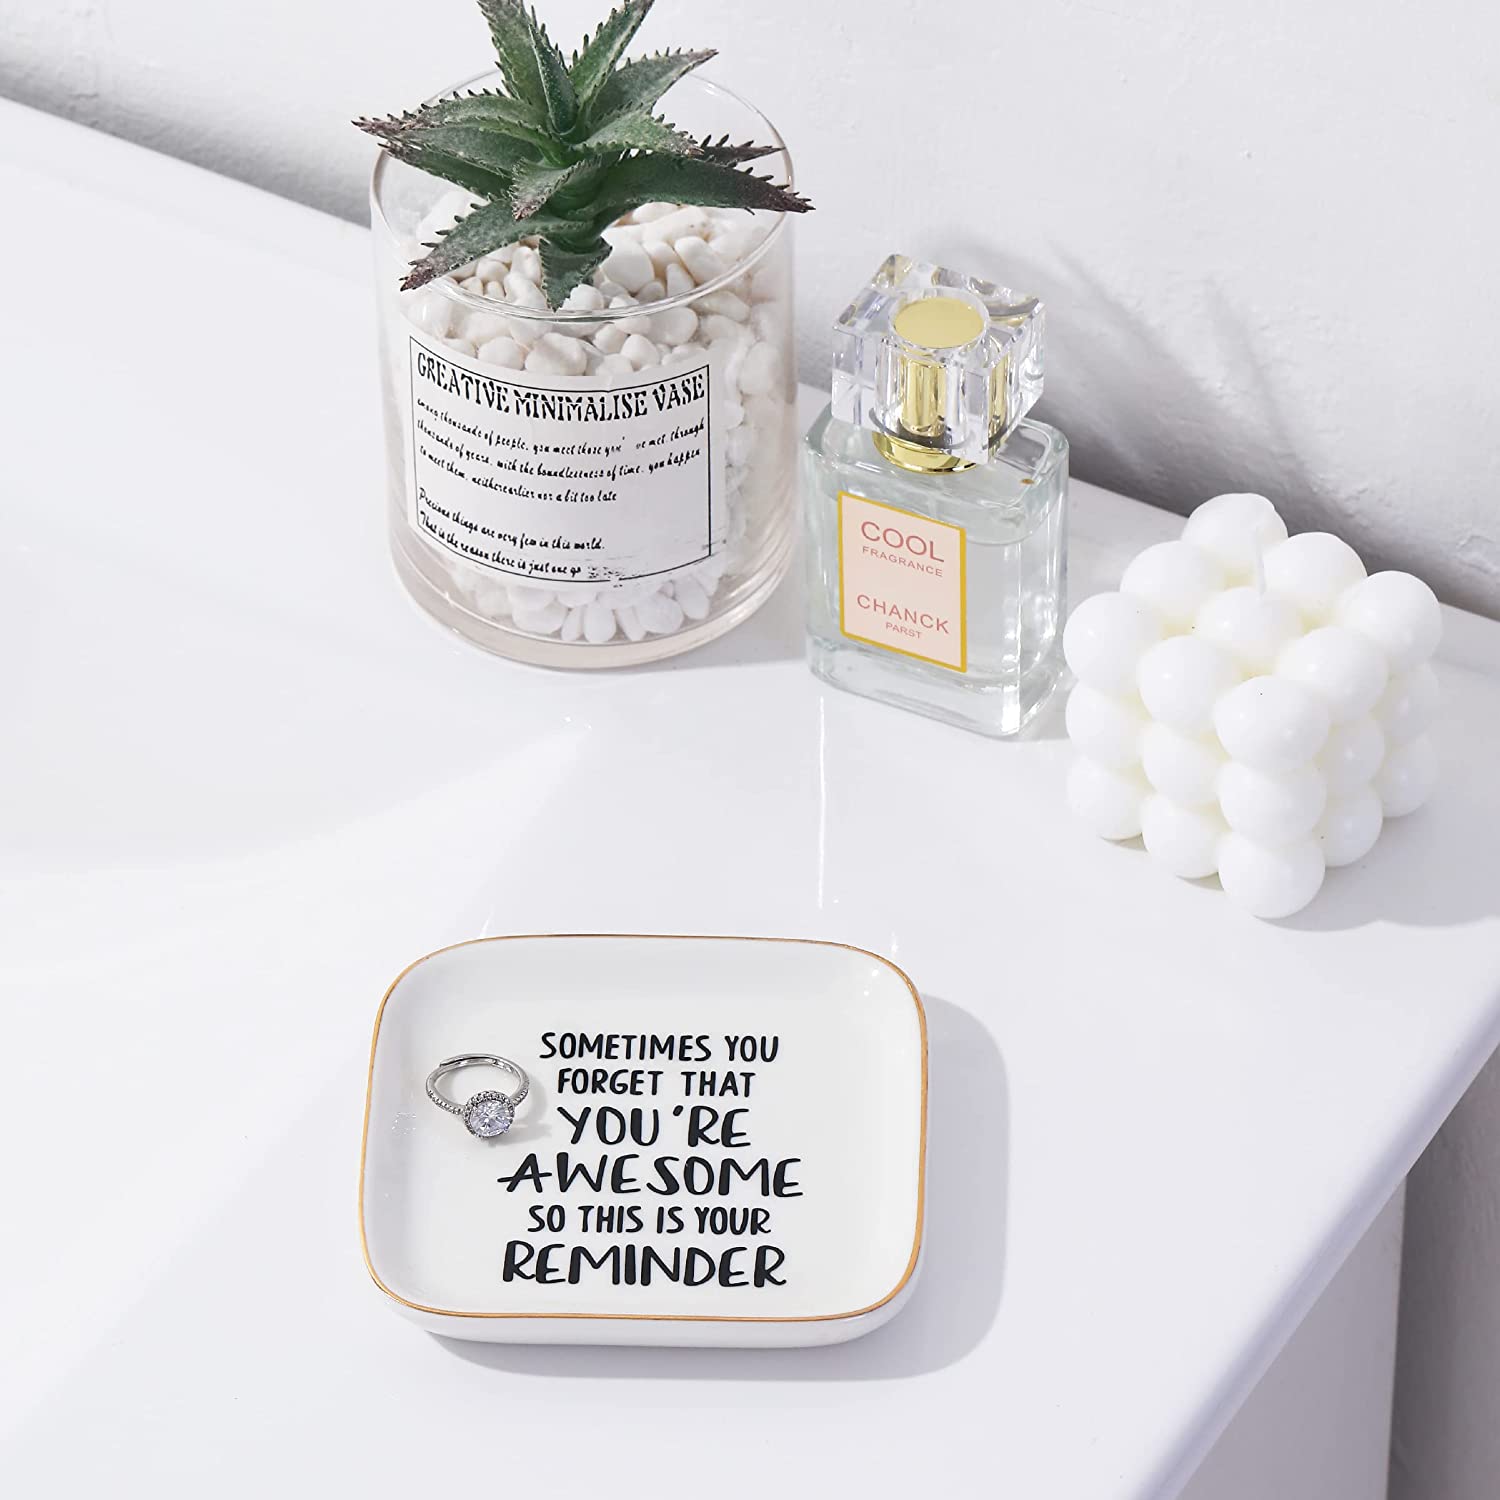 A ring dish on a white table. The ring dish has a quote which says, "Sometimes you forget that you're awesome, so this is your reminder".